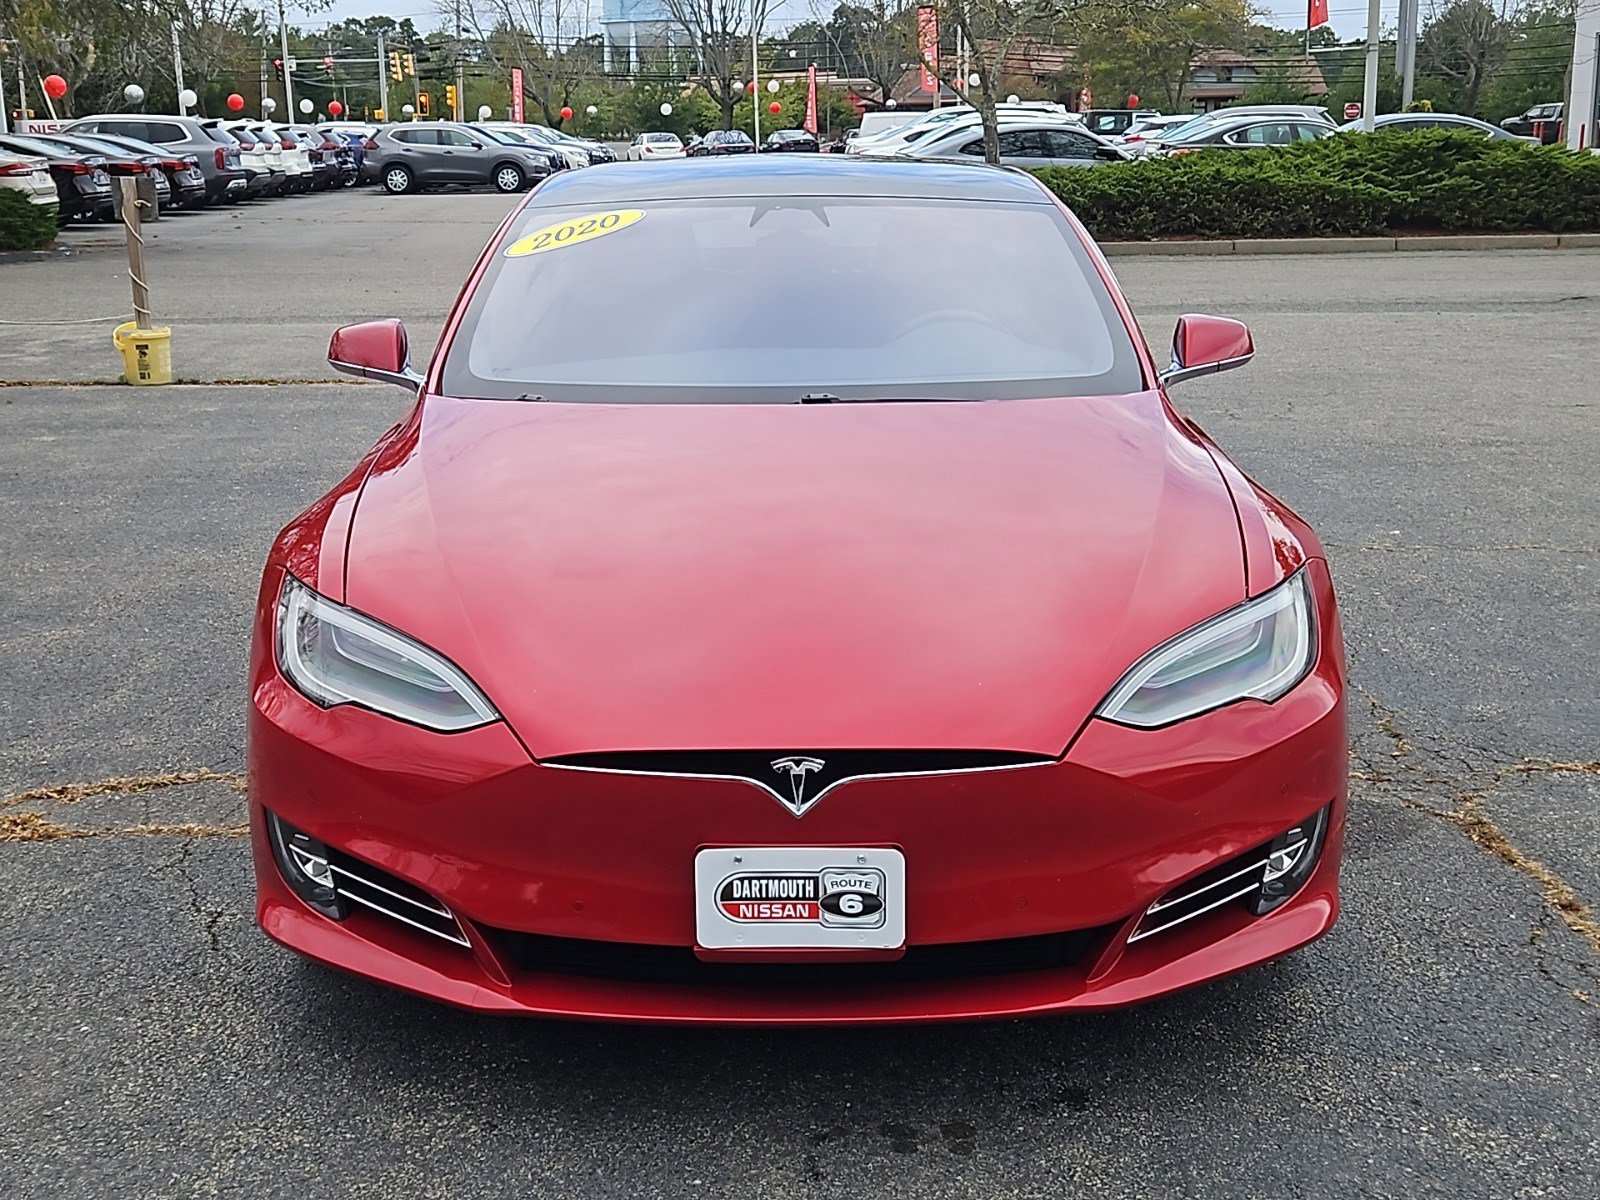 Used 2020 Tesla Model S Performance with VIN 5YJSA1E48LF366687 for sale in Dartmouth, MA